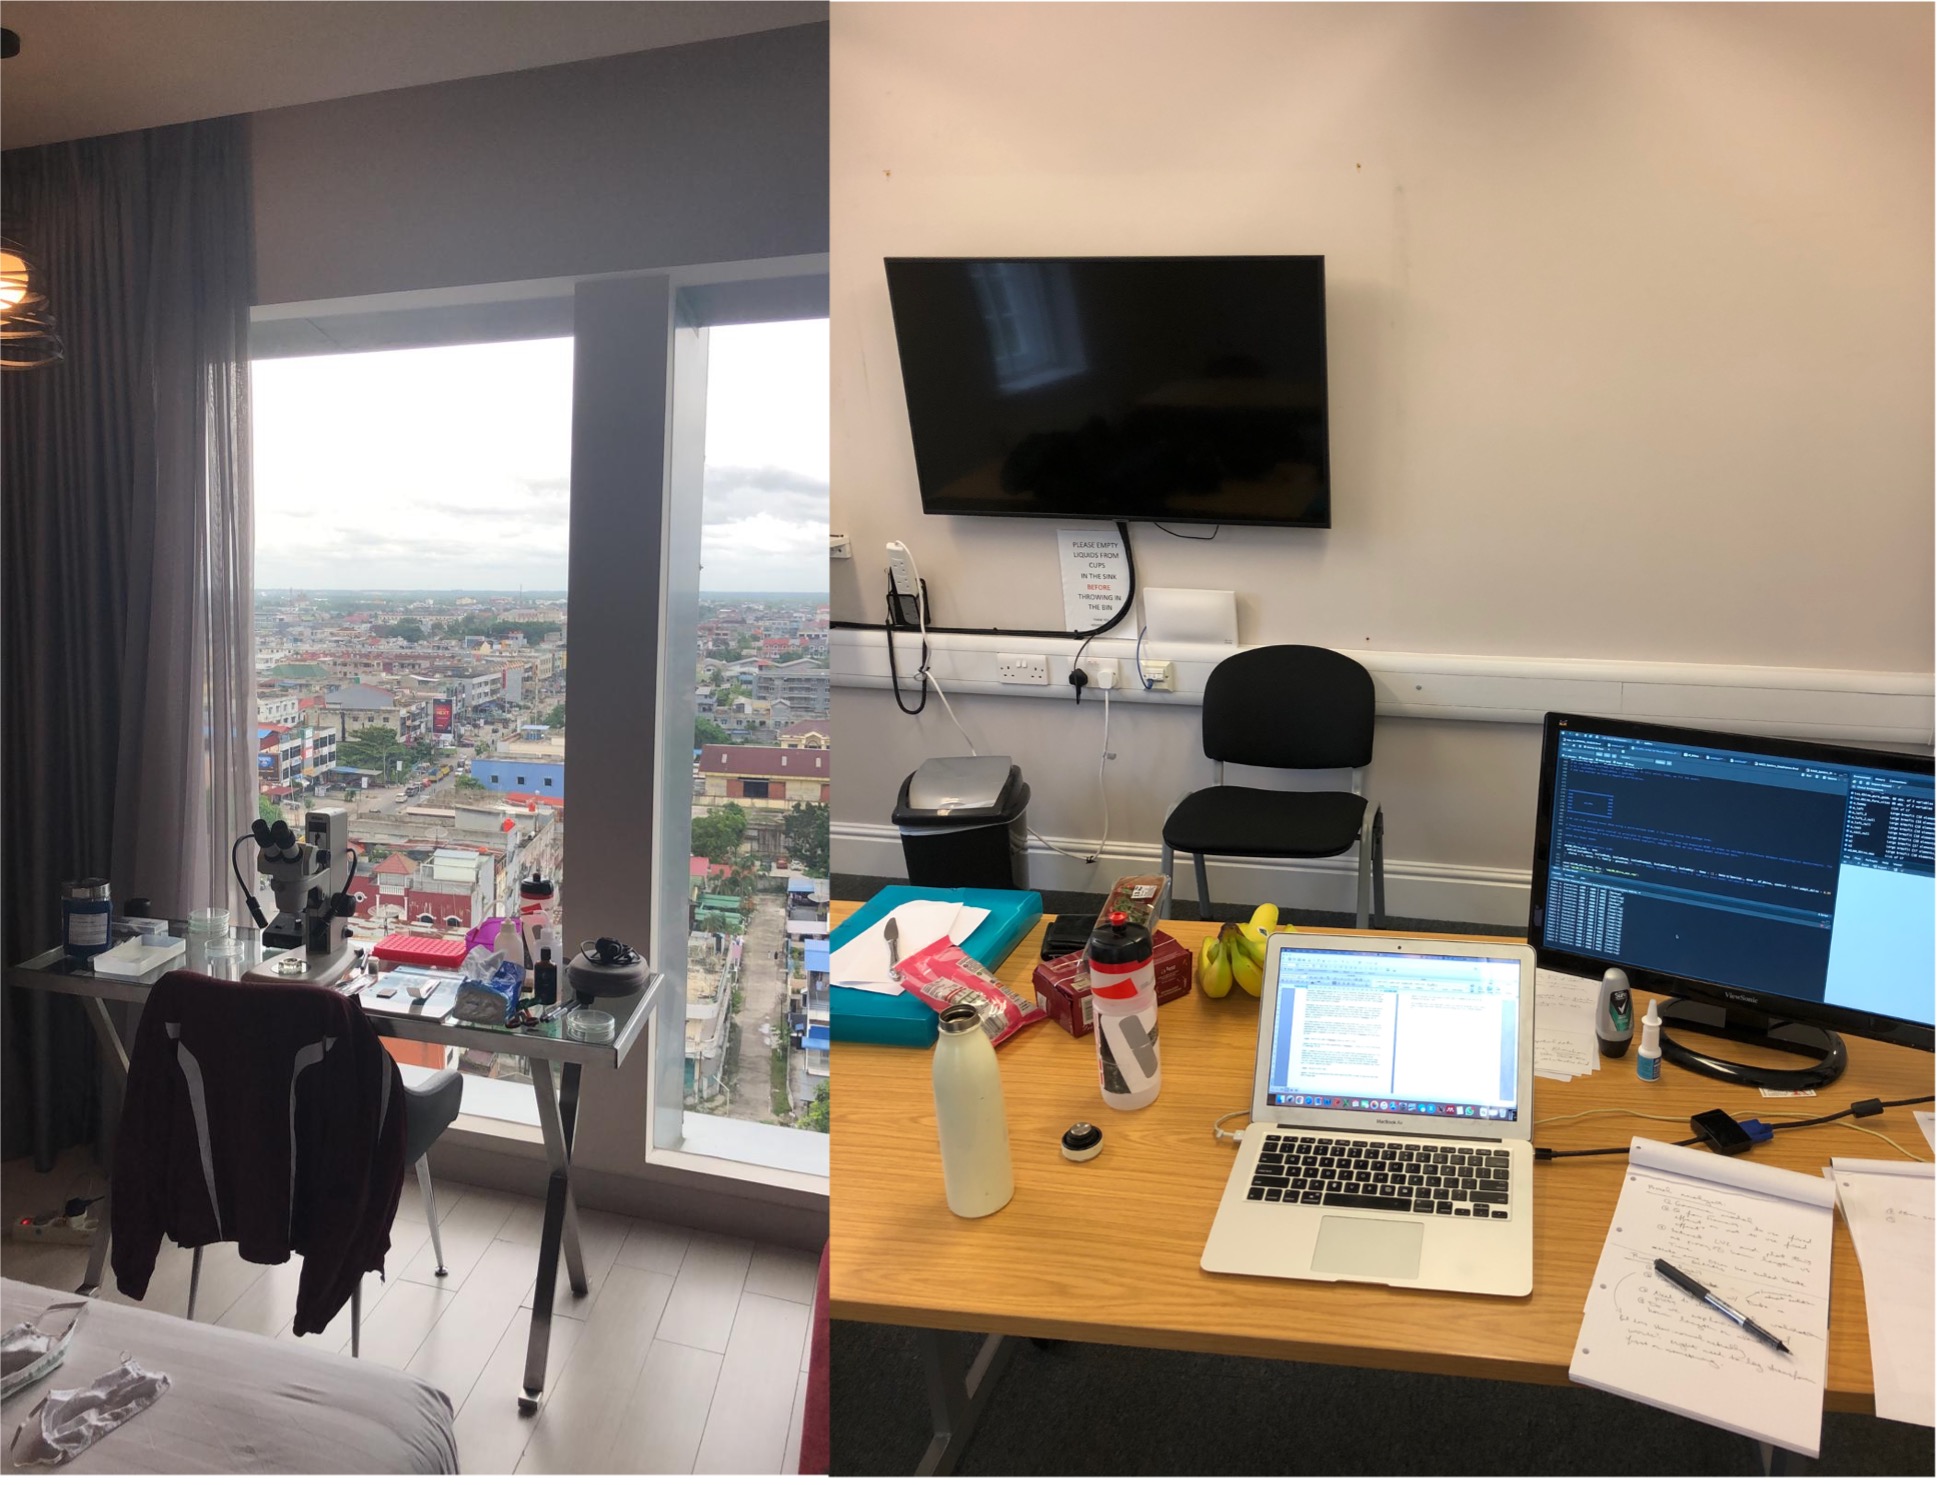 My desk and view whilst quarantining in Pekanbaru (Left) versus my current work set-up in Cambridge, UK (Right).